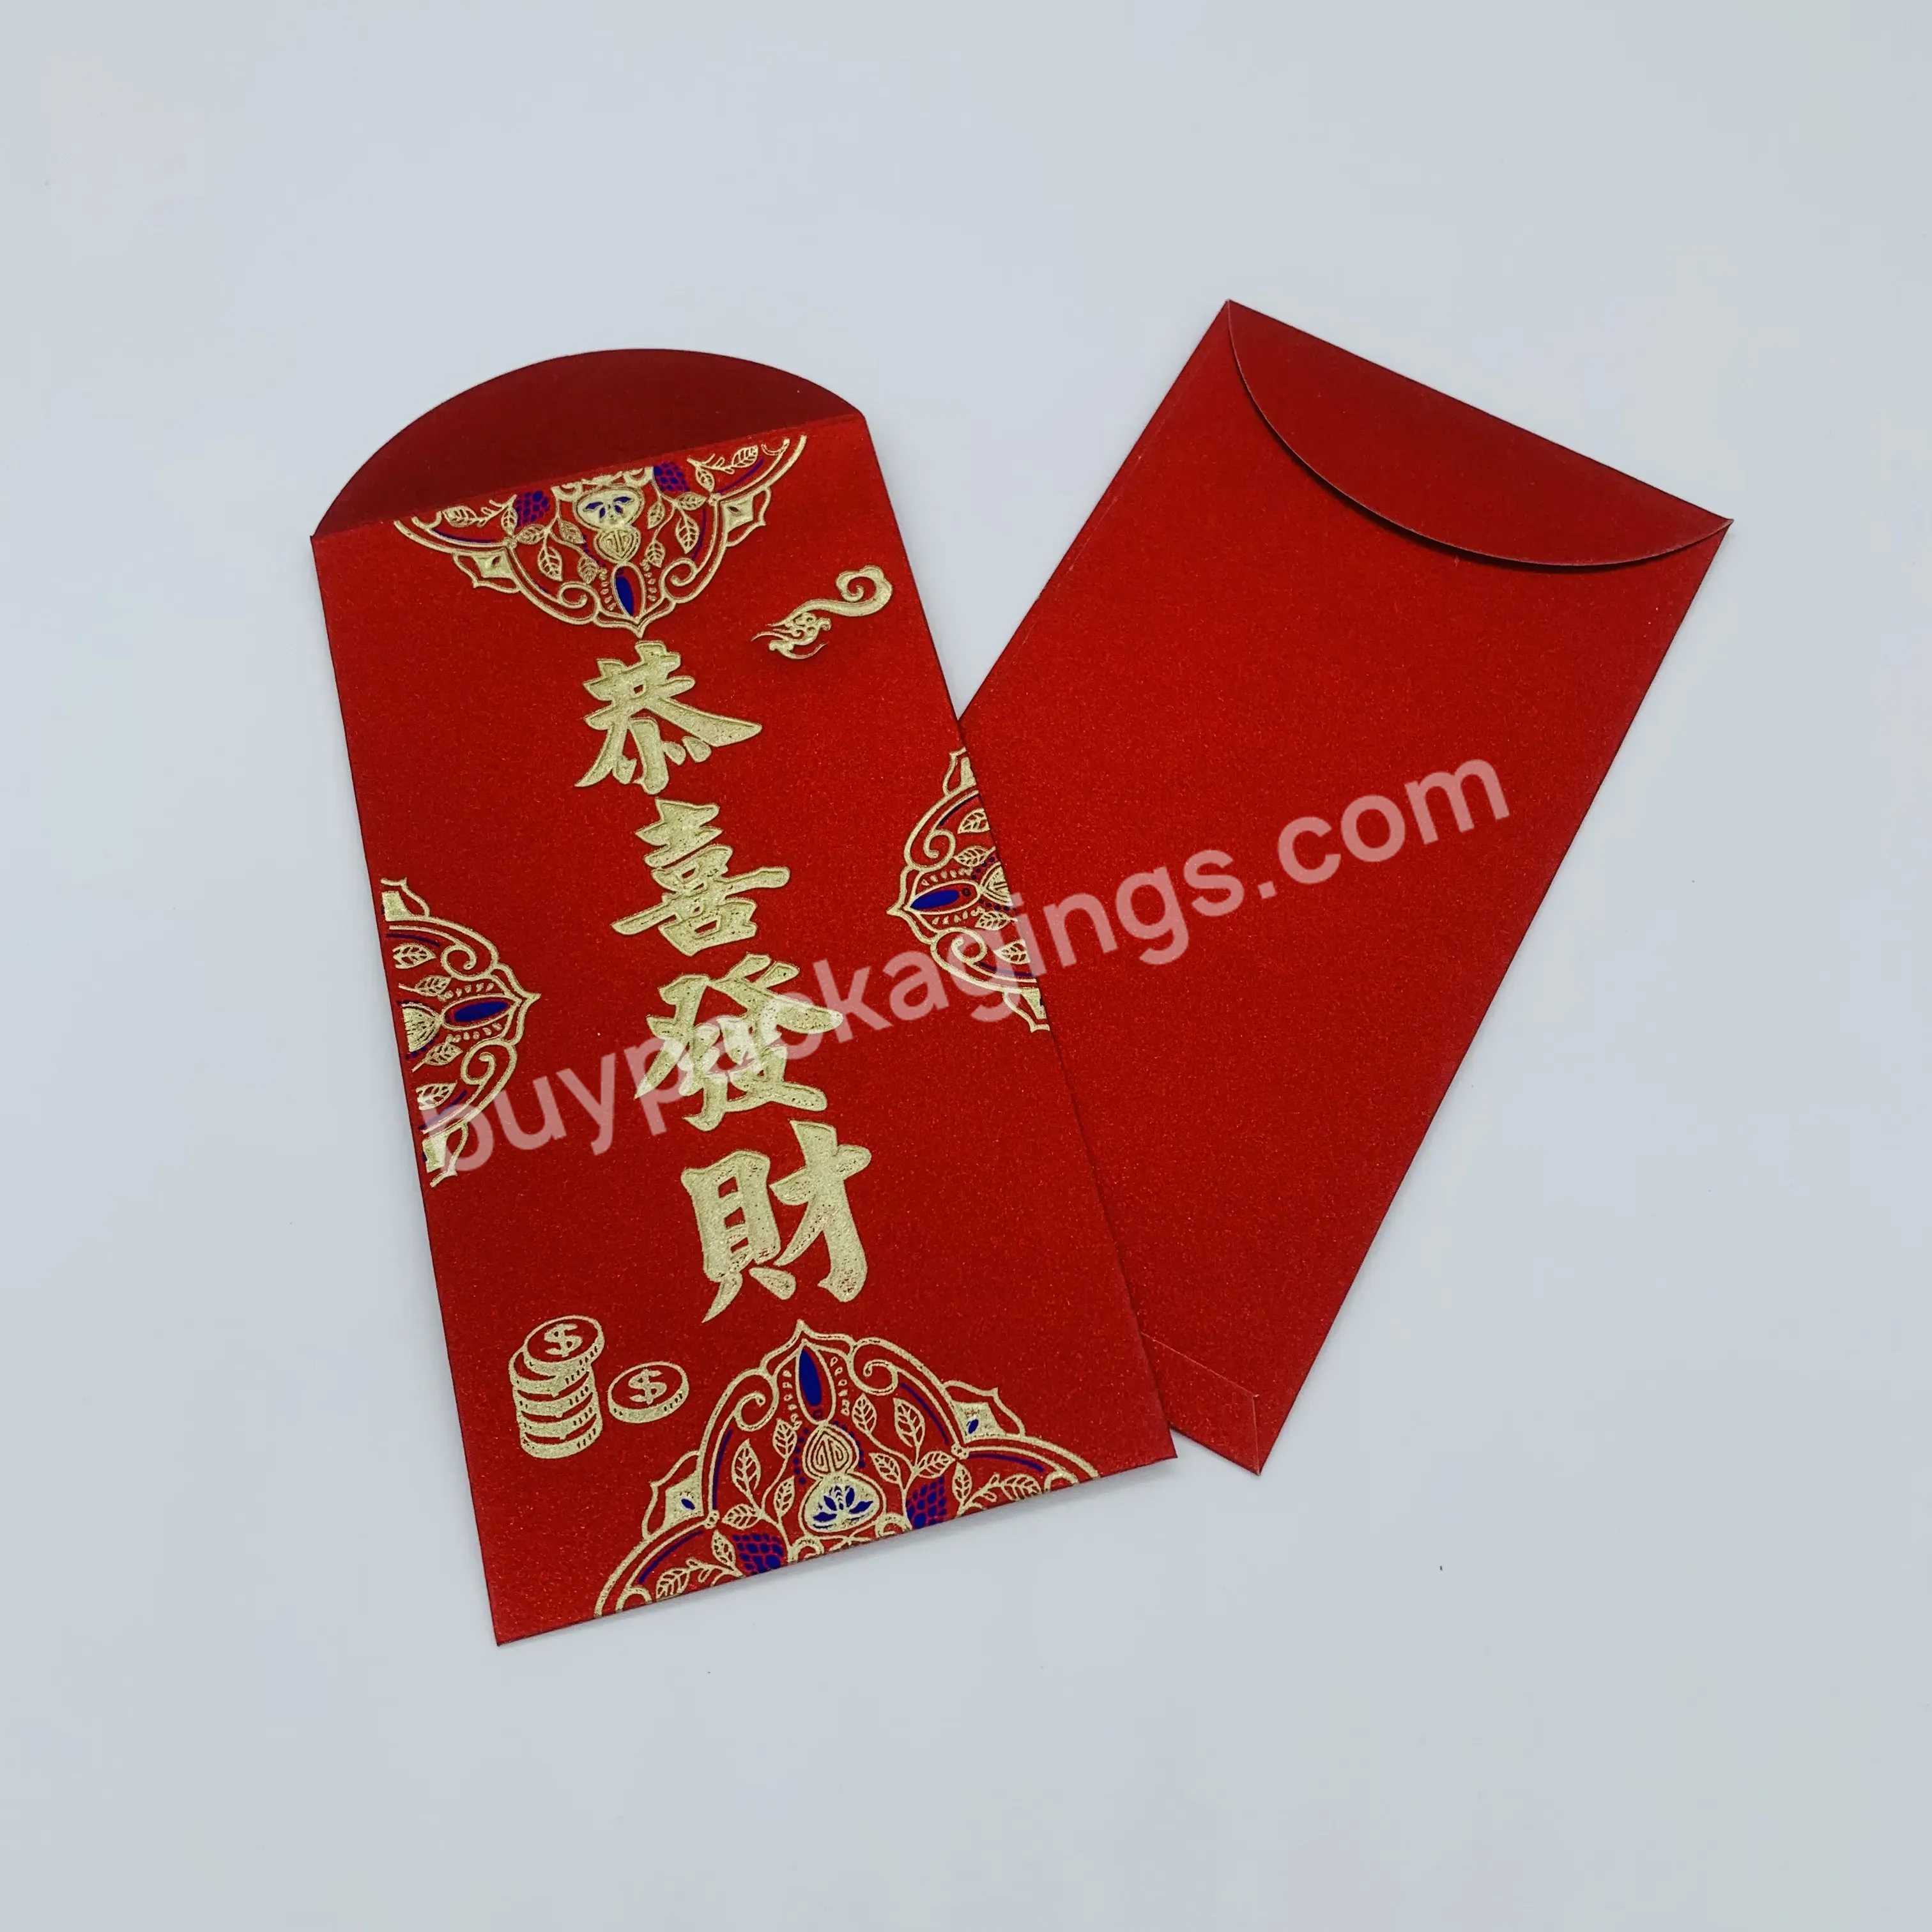 Goods In Stock Traditional Red Envelope Packets For Chinese New Year Hongbao With Hot Gold Blue Foil Stamp Logo - Buy Ang Bao In Stock,Happy Chinese New Year Red Pocket,Red Packet Design For New Year.